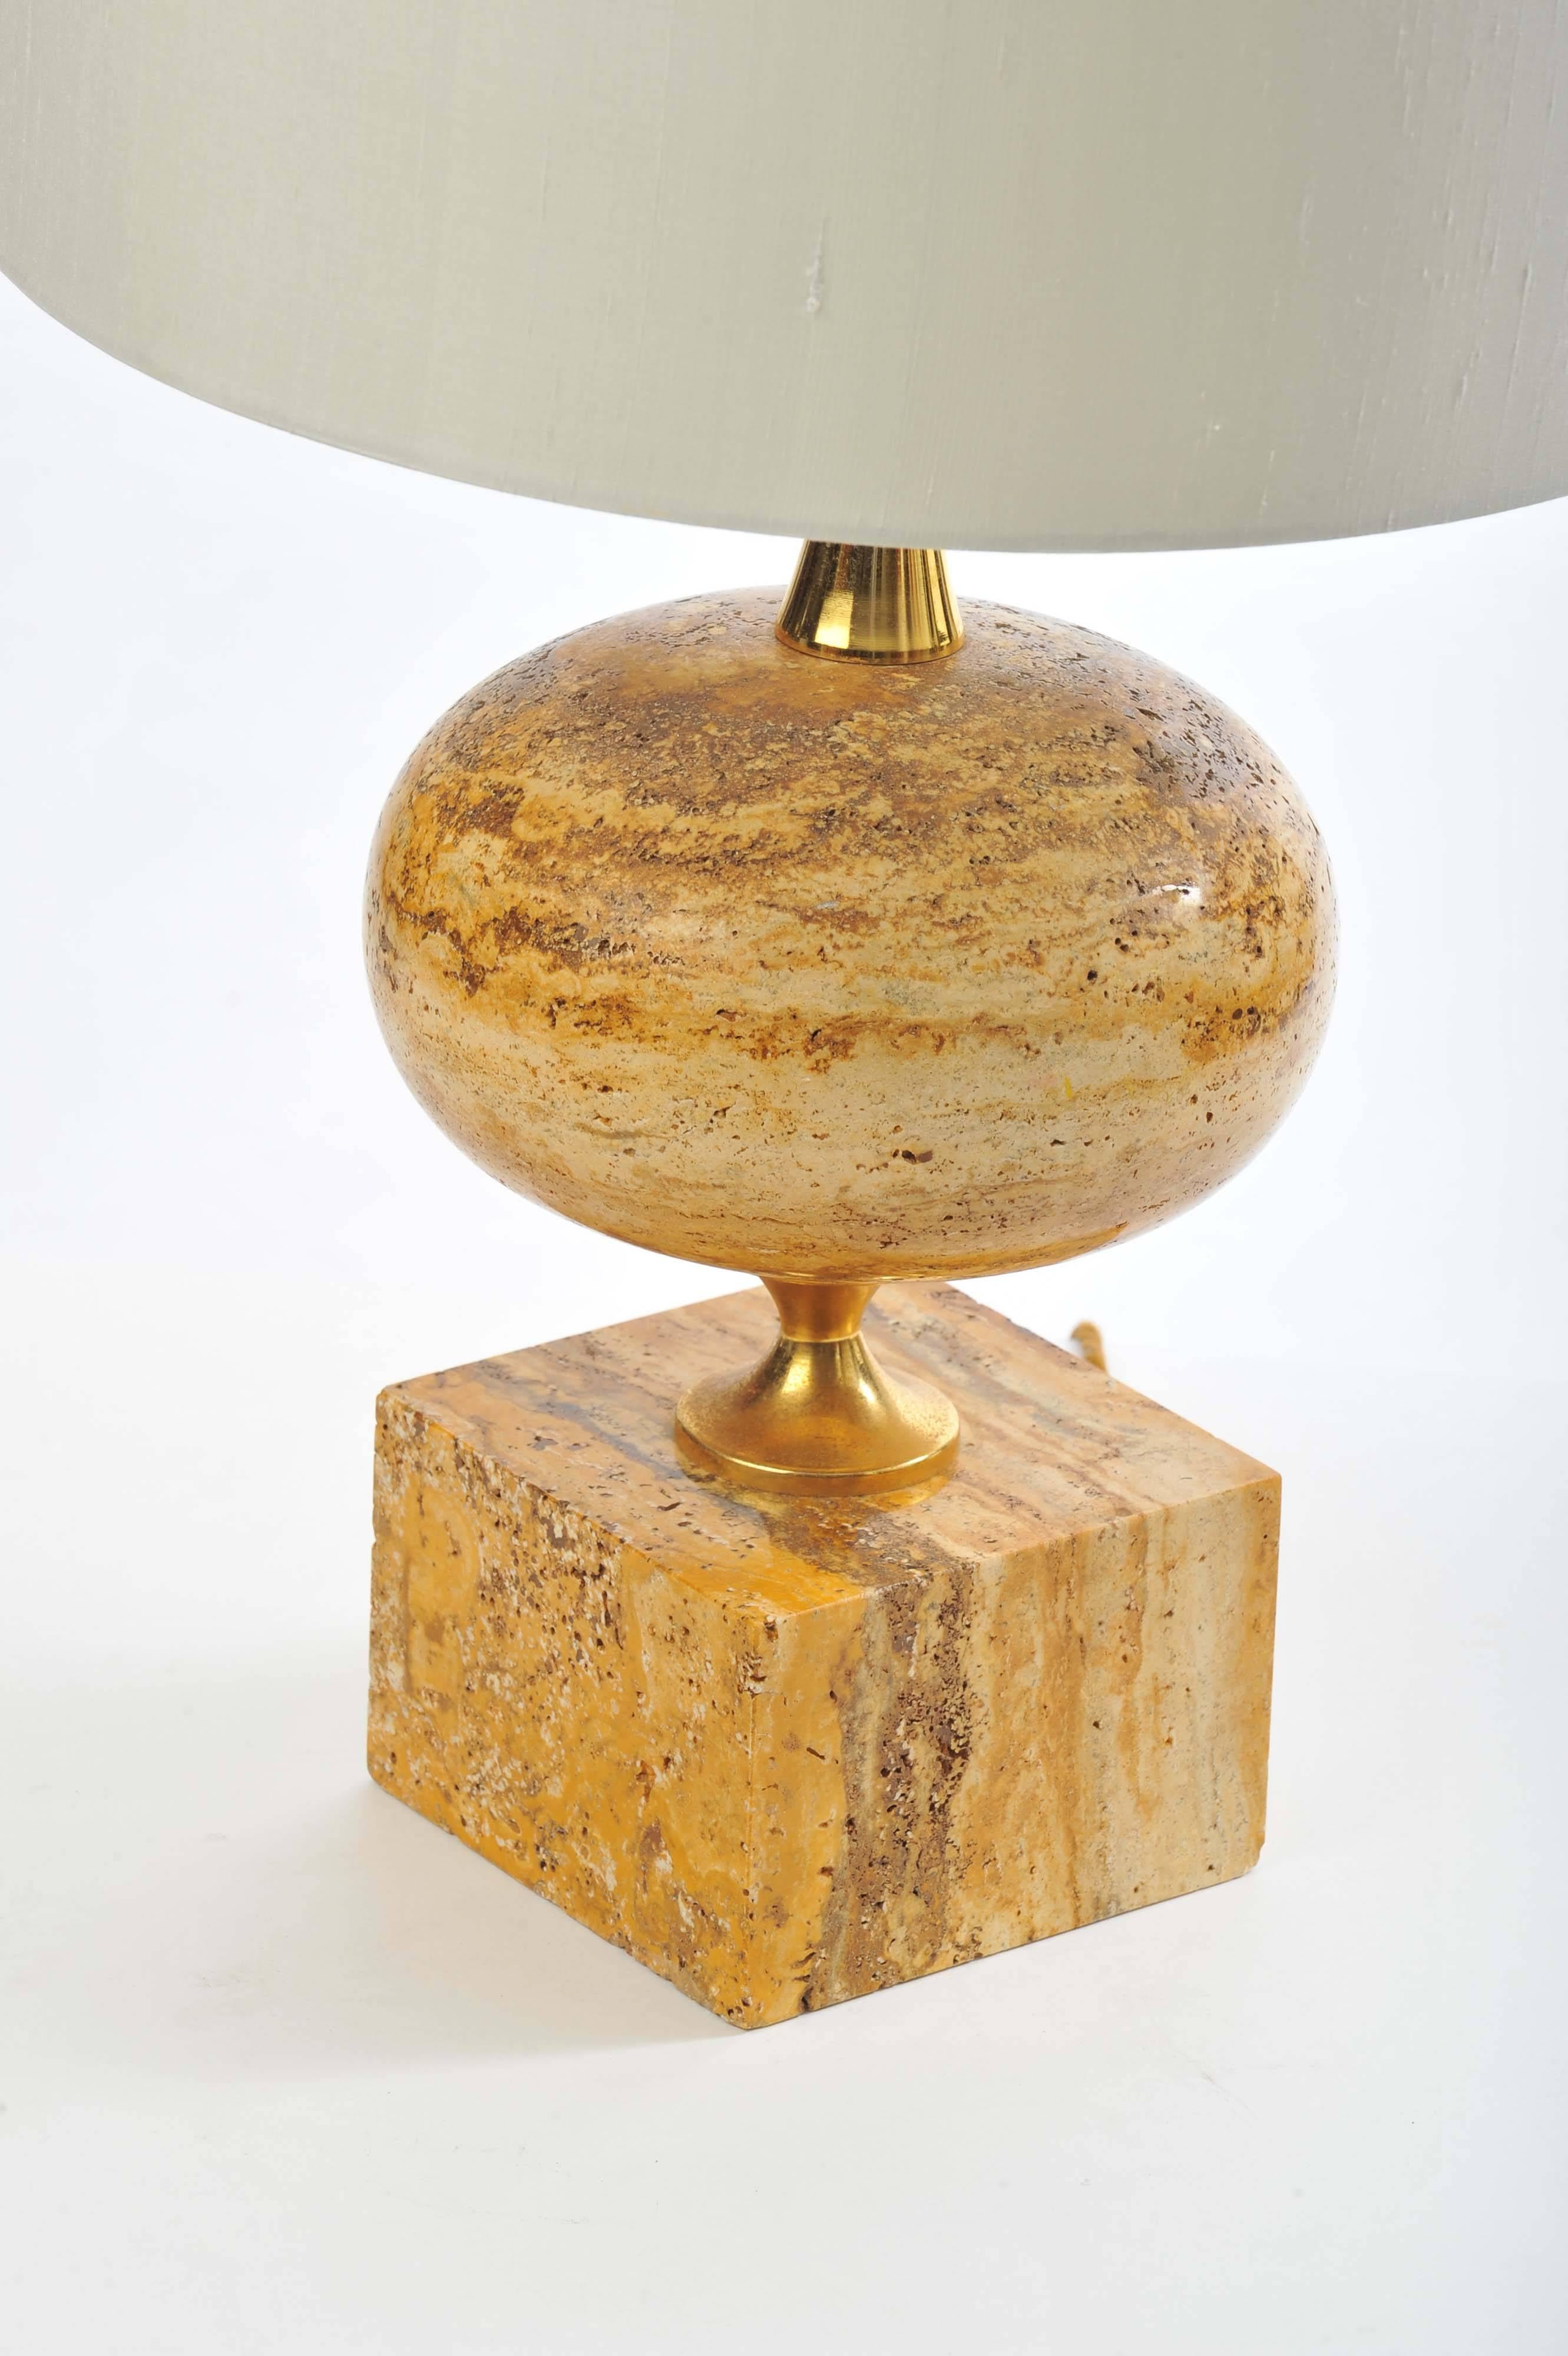 Curvaceous lamp in polished travertine stone, build up in layers of cream, orange, rusty brown tones, created from the geothermal springs. The travertine contrasts well with the brass supports and the cream silk lamp shade.
The width of the solid